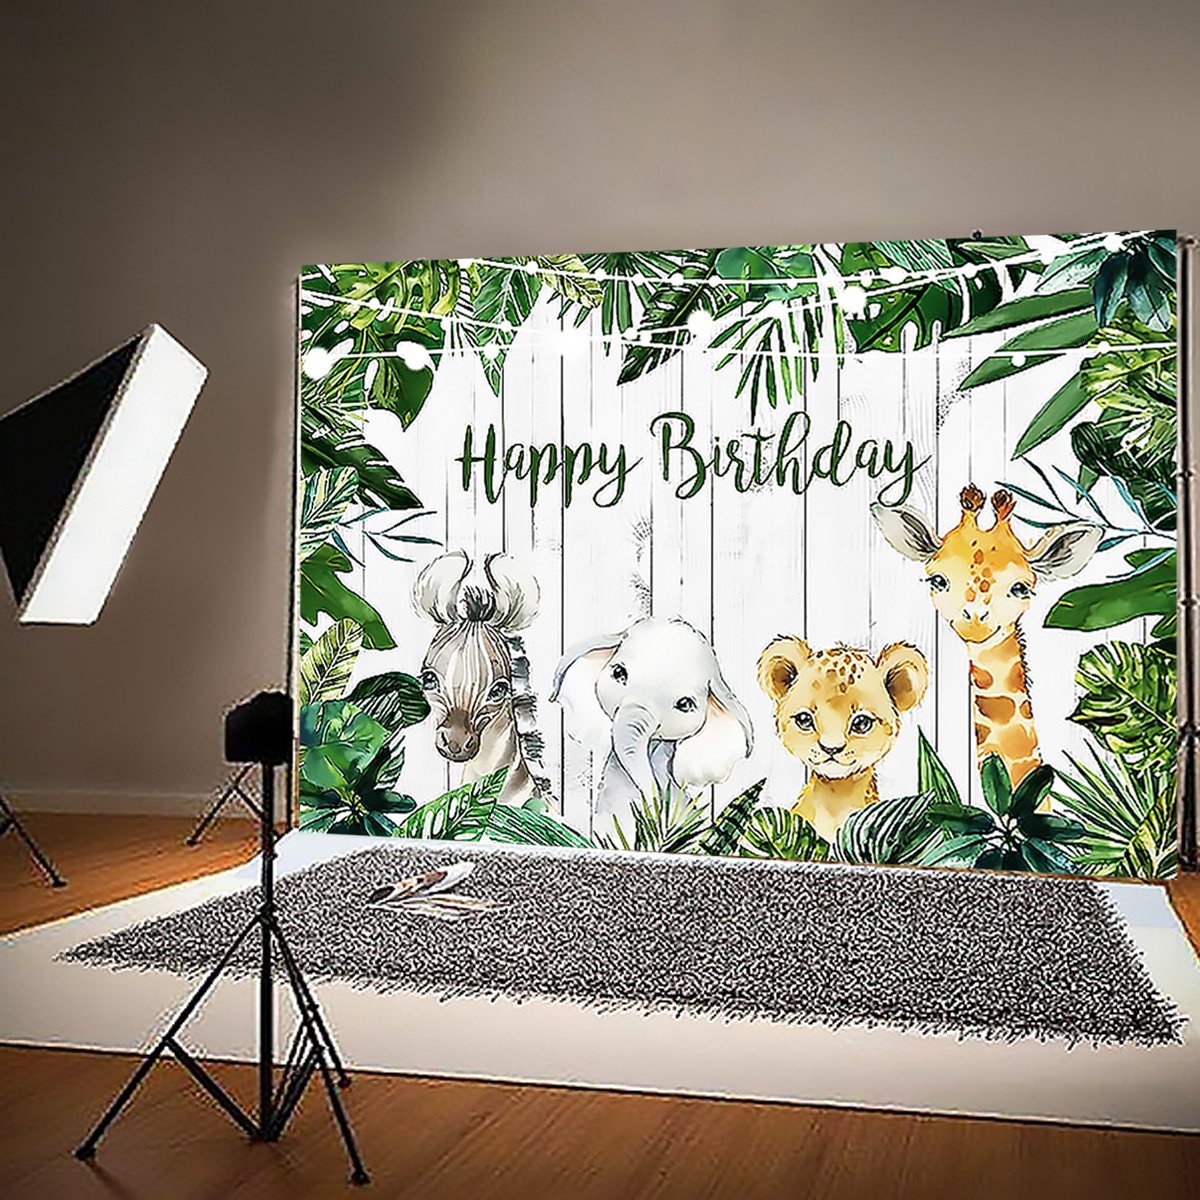 3-Size-Jungle-Green-Forest-Backdrop-Happy-Birthday-Background-Photography-Woodland-Party-Prop-1876181-11